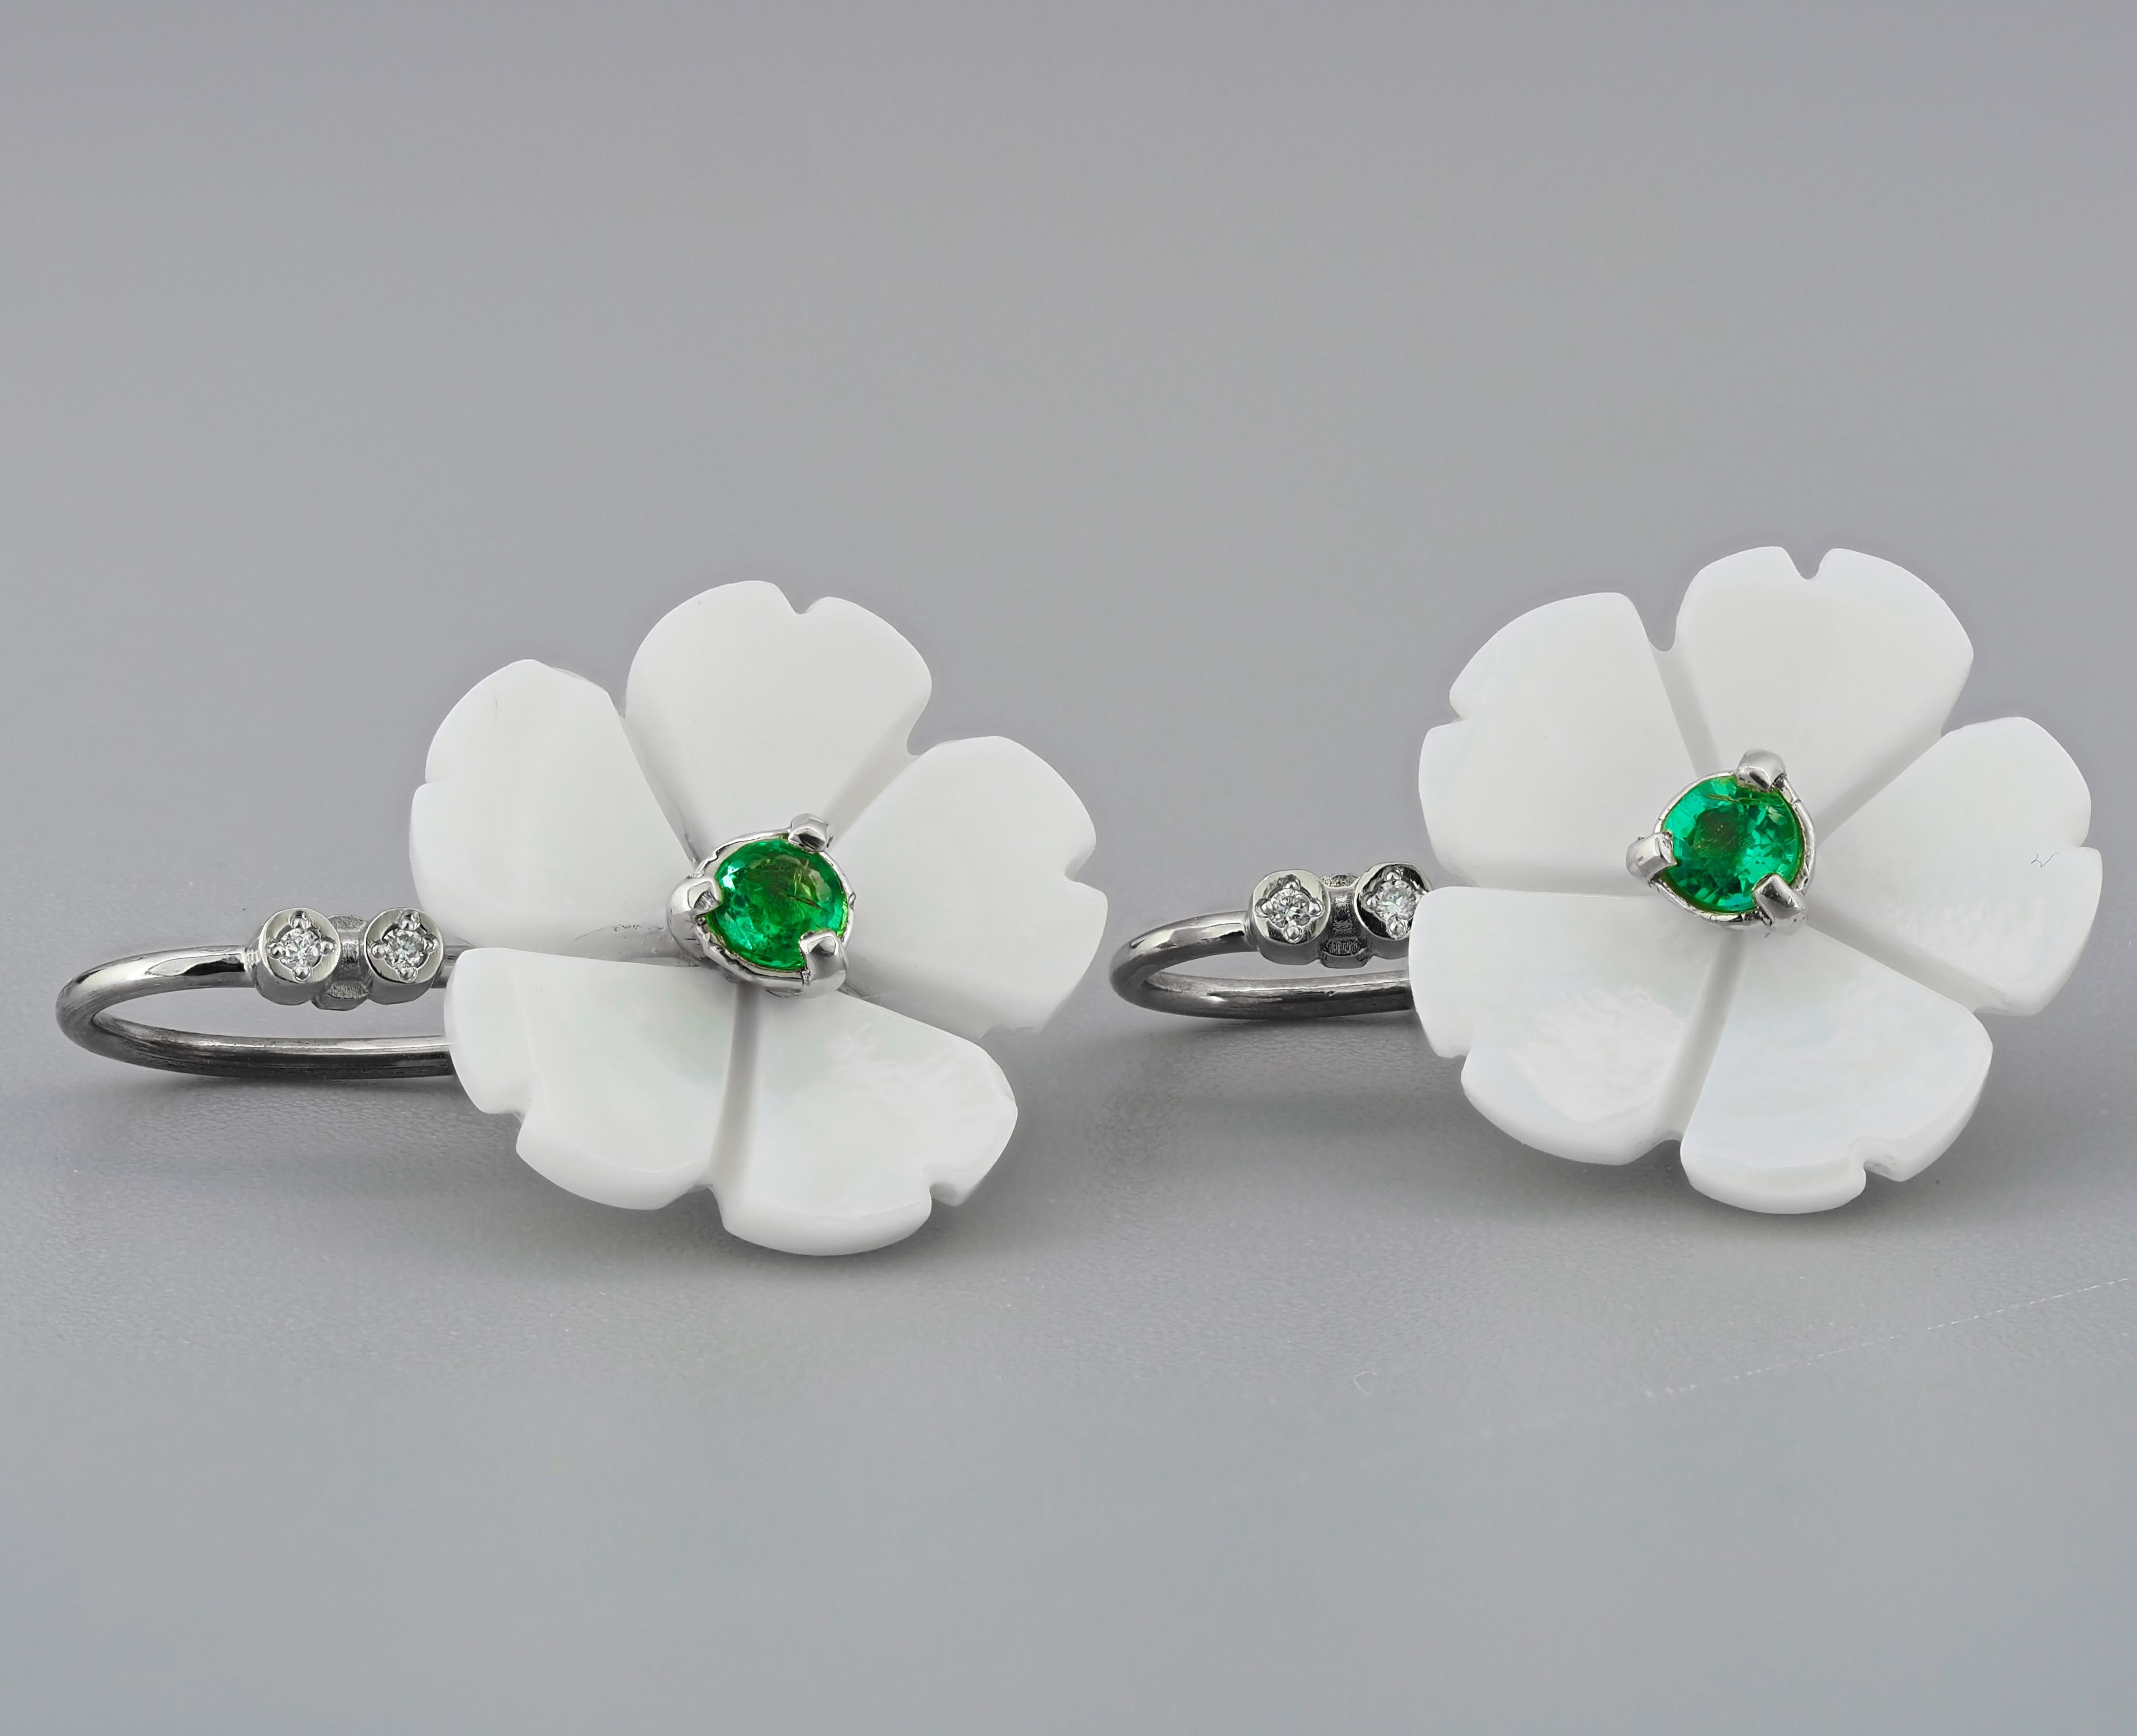 Flower 14k gold earrings with emeralds. 
Emeralds and carved mother of pearl earrings.

Metal: 14k gold.
Weight: 3 gr.

Central stone: Emeralds- 2 pieces
Cut: Round
Weight: aprx 0.25 ct. total.
Color: green
Clarity: Transparent with inclusions (See